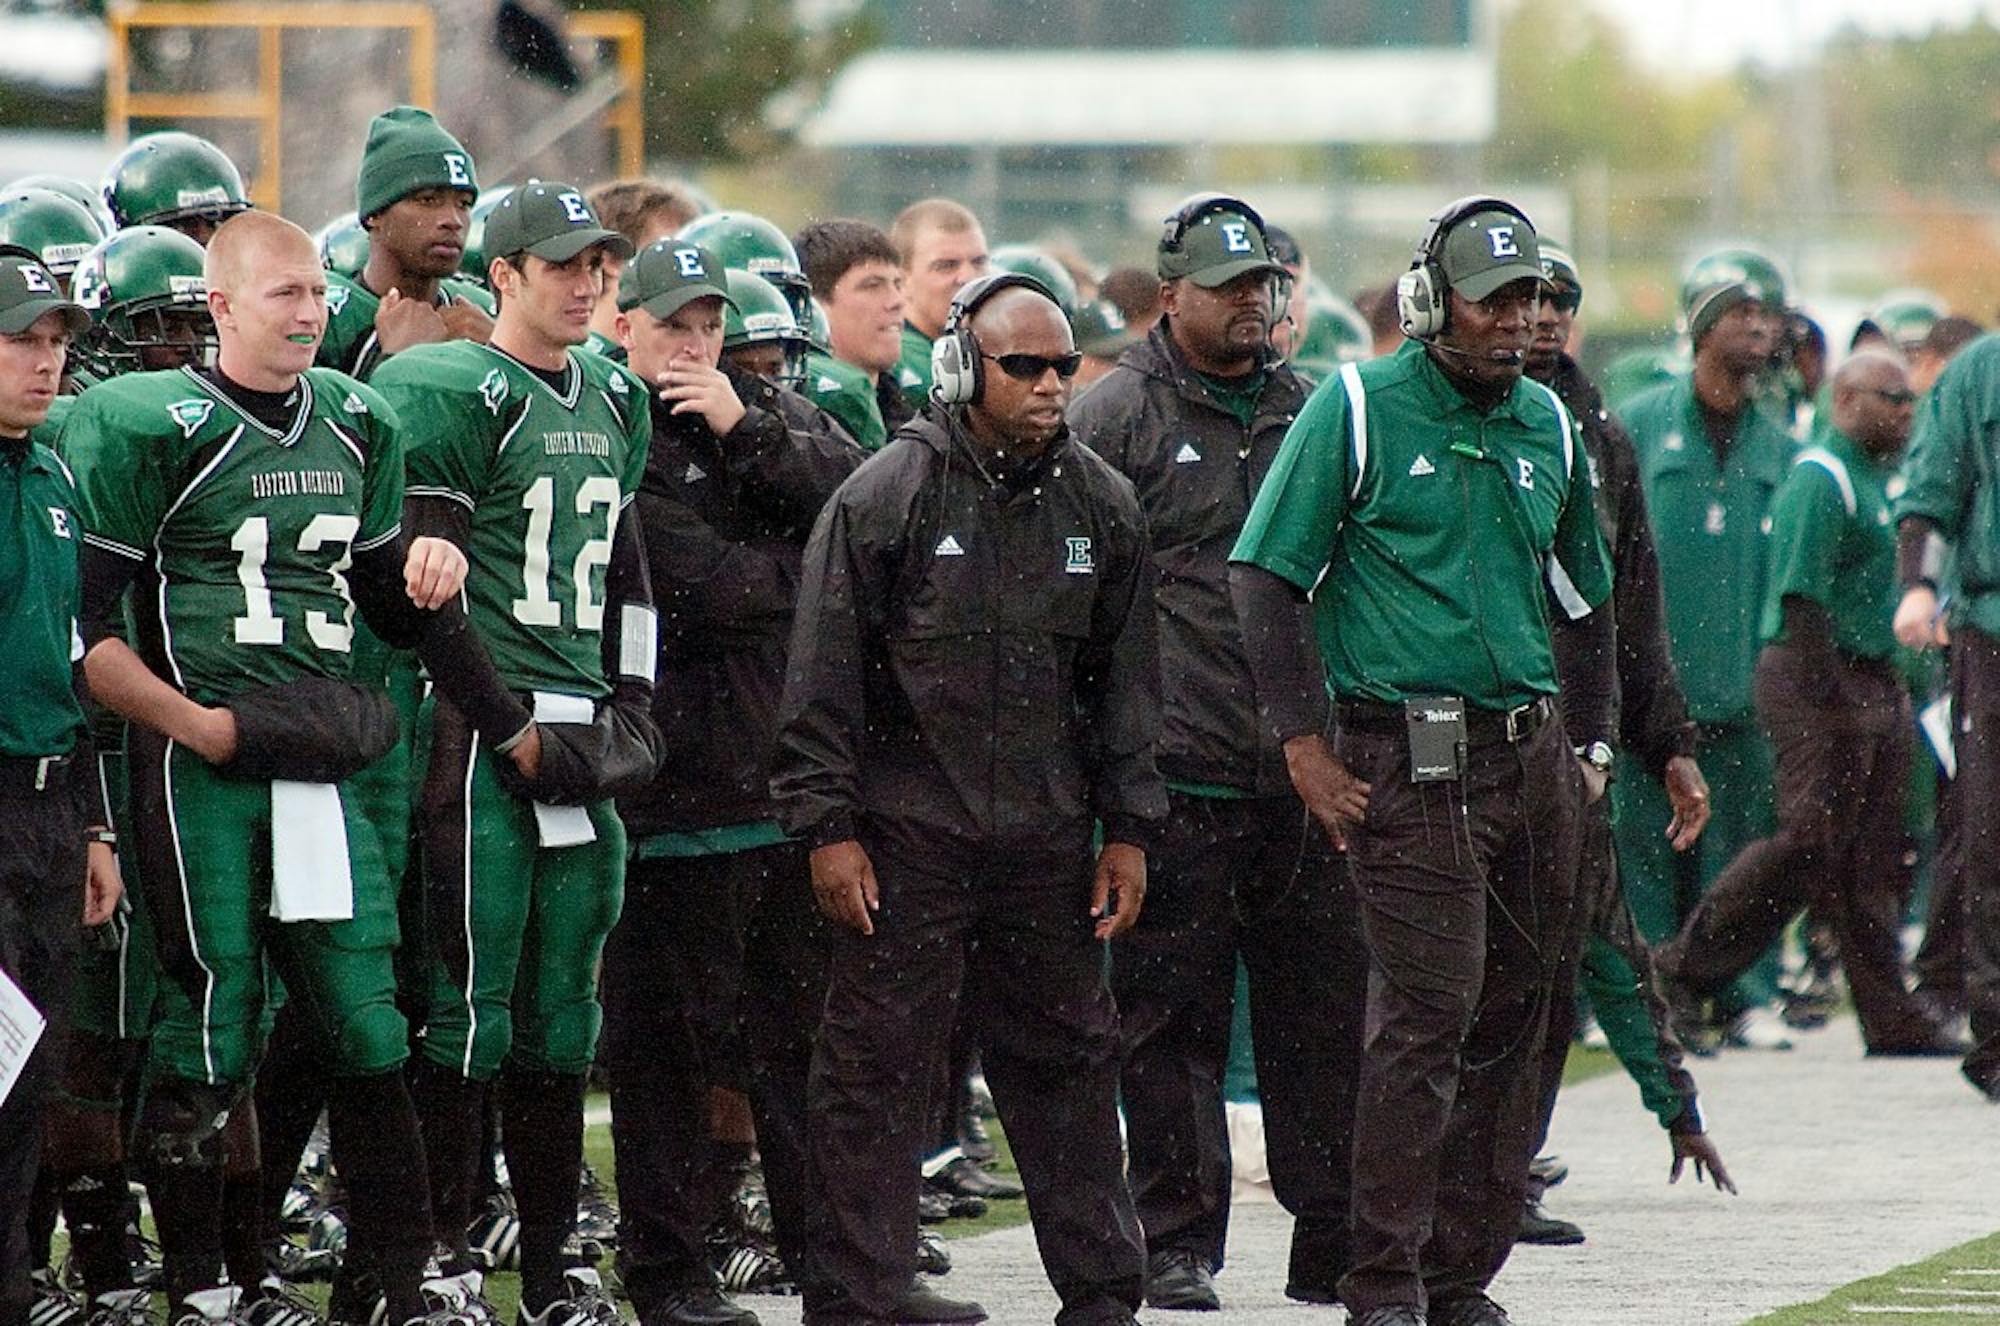 Ron English (far right) looks from the sideline in EMU’s loss Saturday. His defense allowed 365 yards.